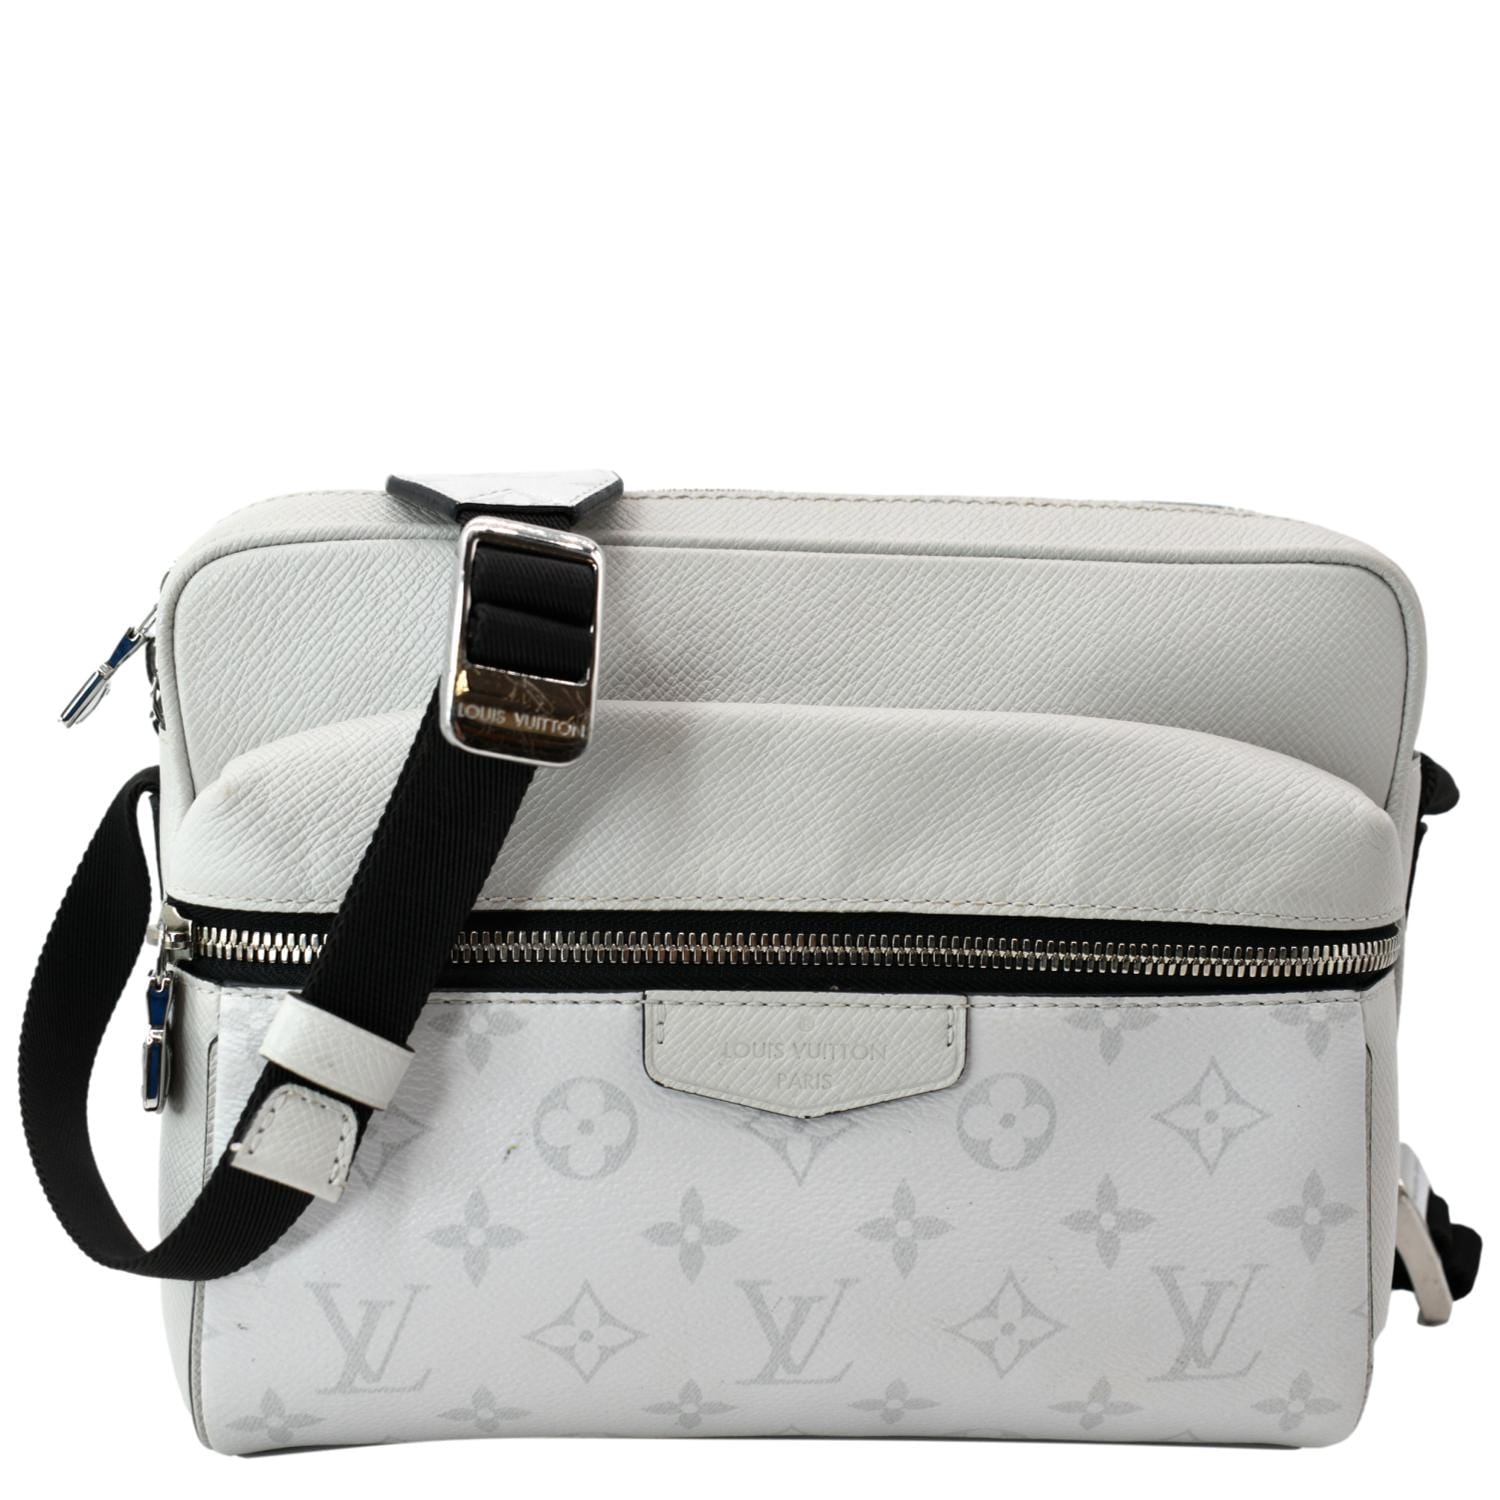 Louis Vuitton - Authenticated Outdoor Bag - Leather White Plain for Men, Very Good Condition